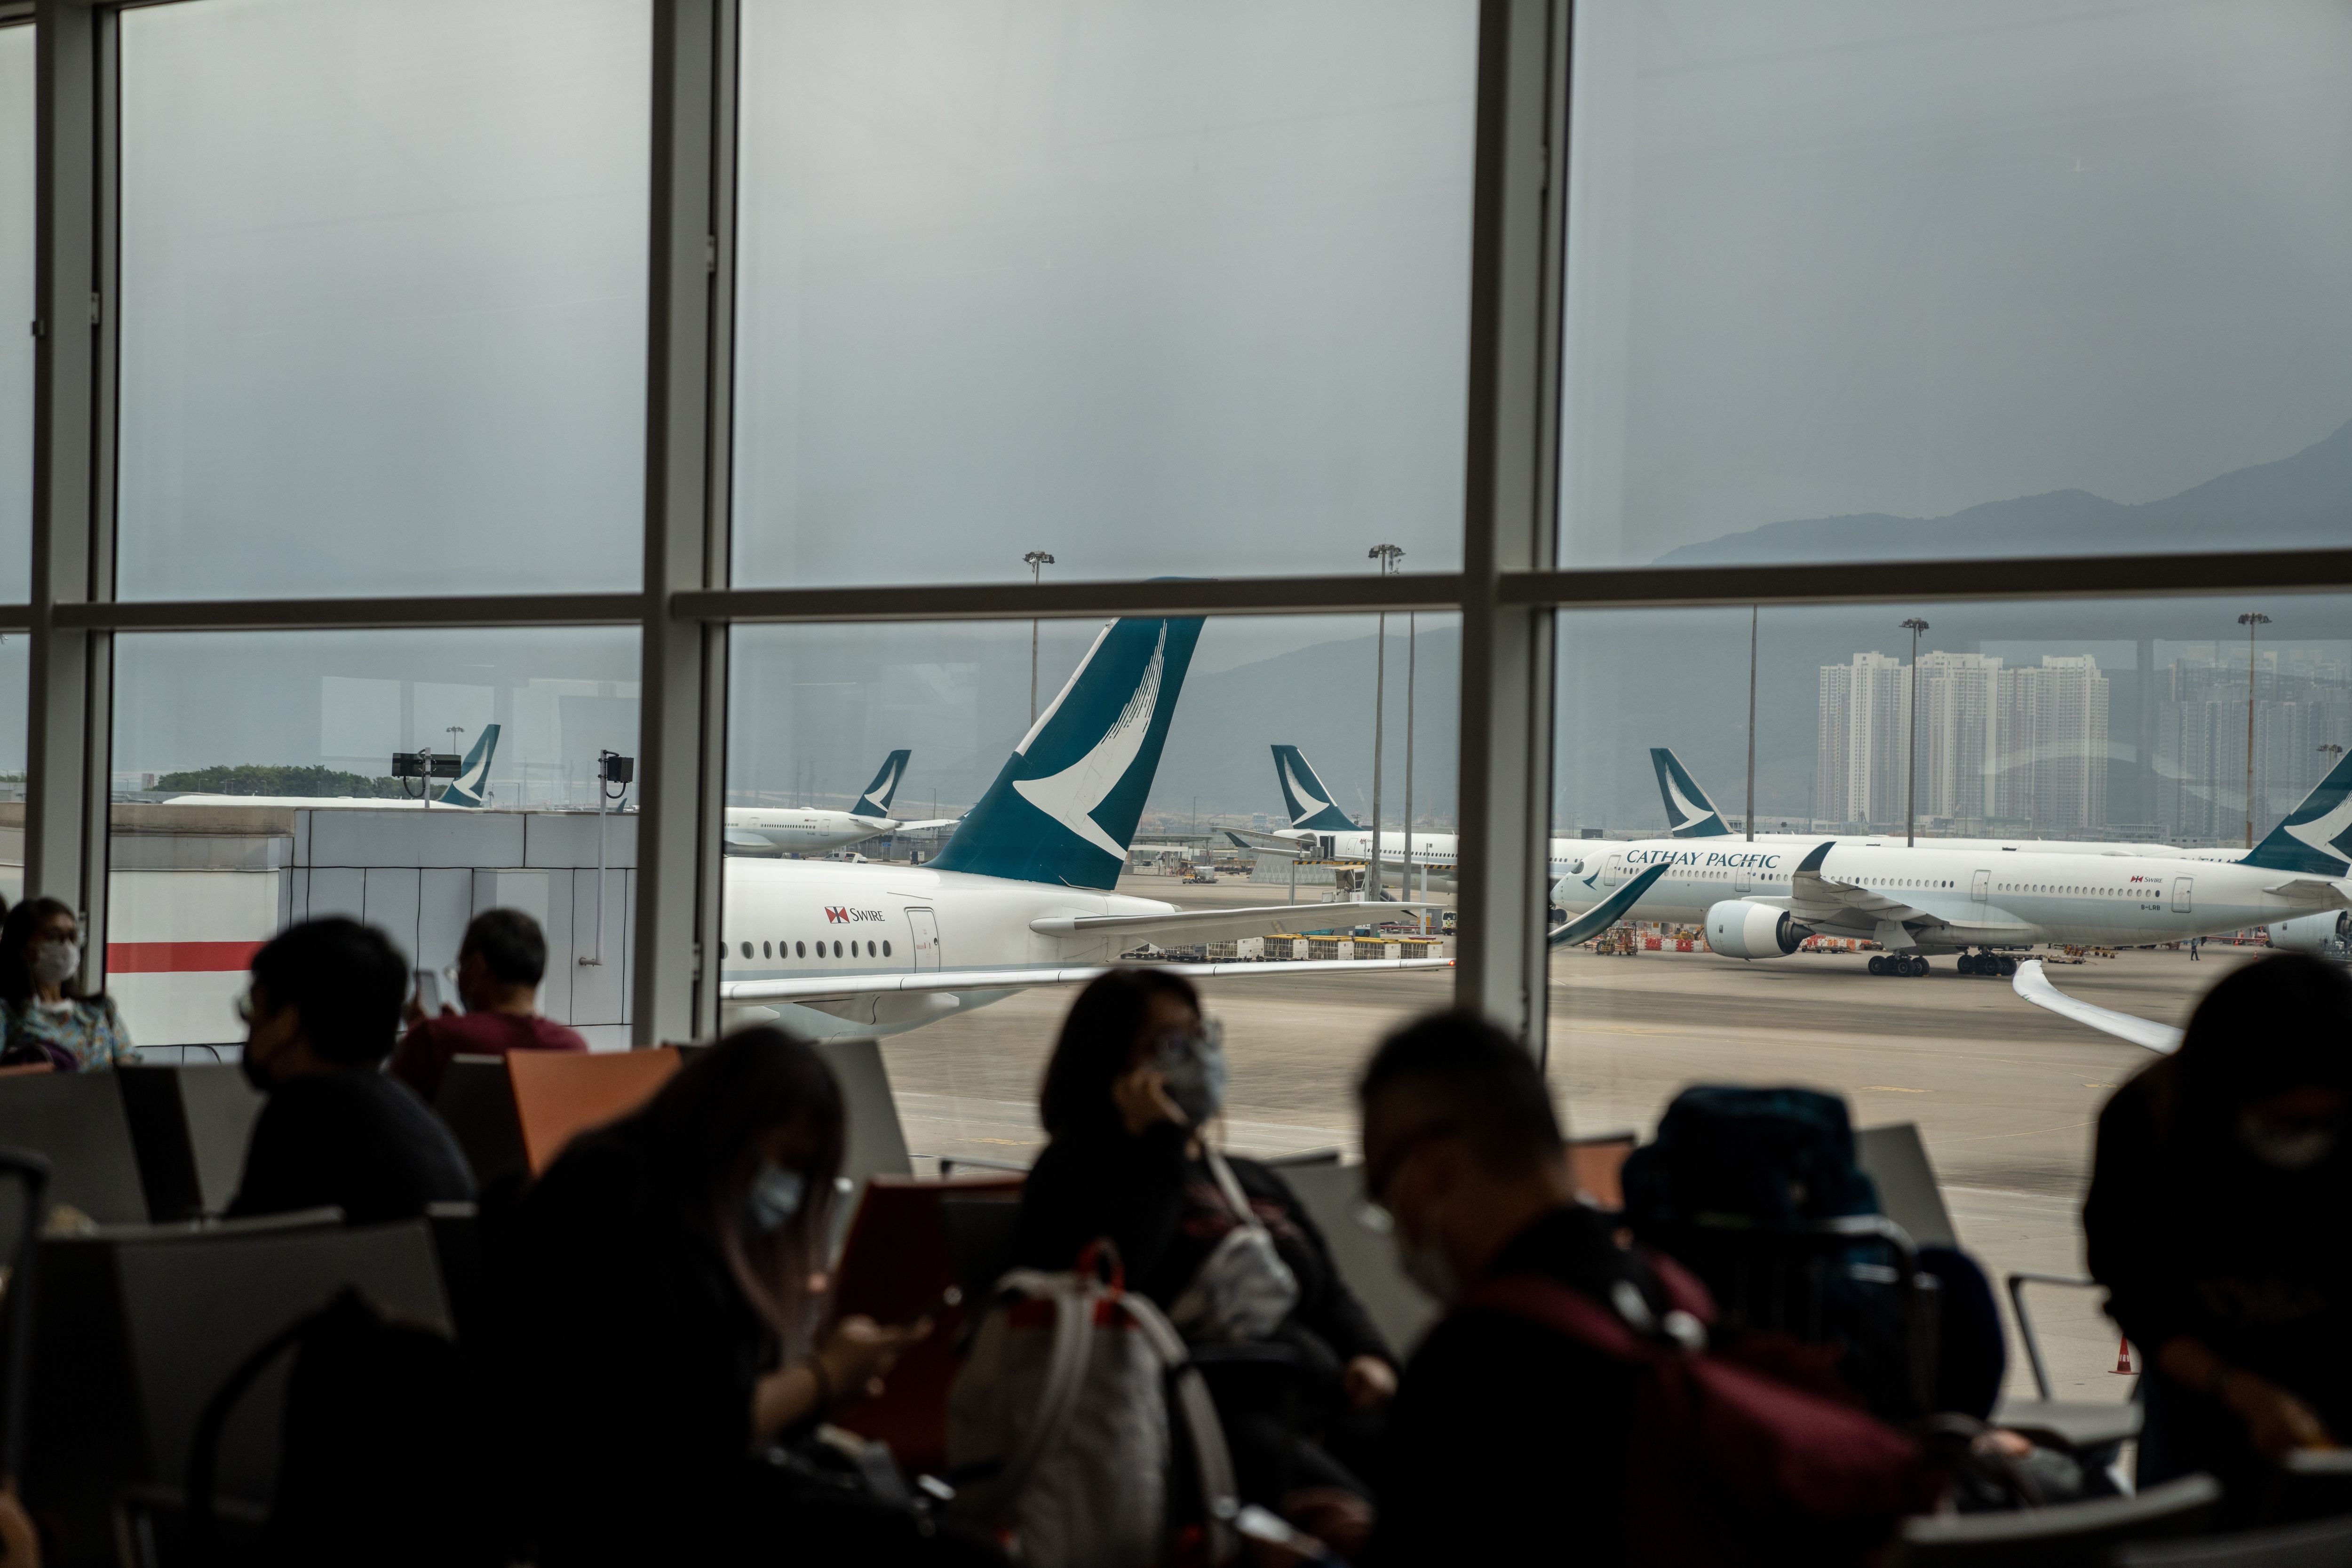 Passengers waiting in Hong Kong. Cathay Pacific planes can be seen in the back. 